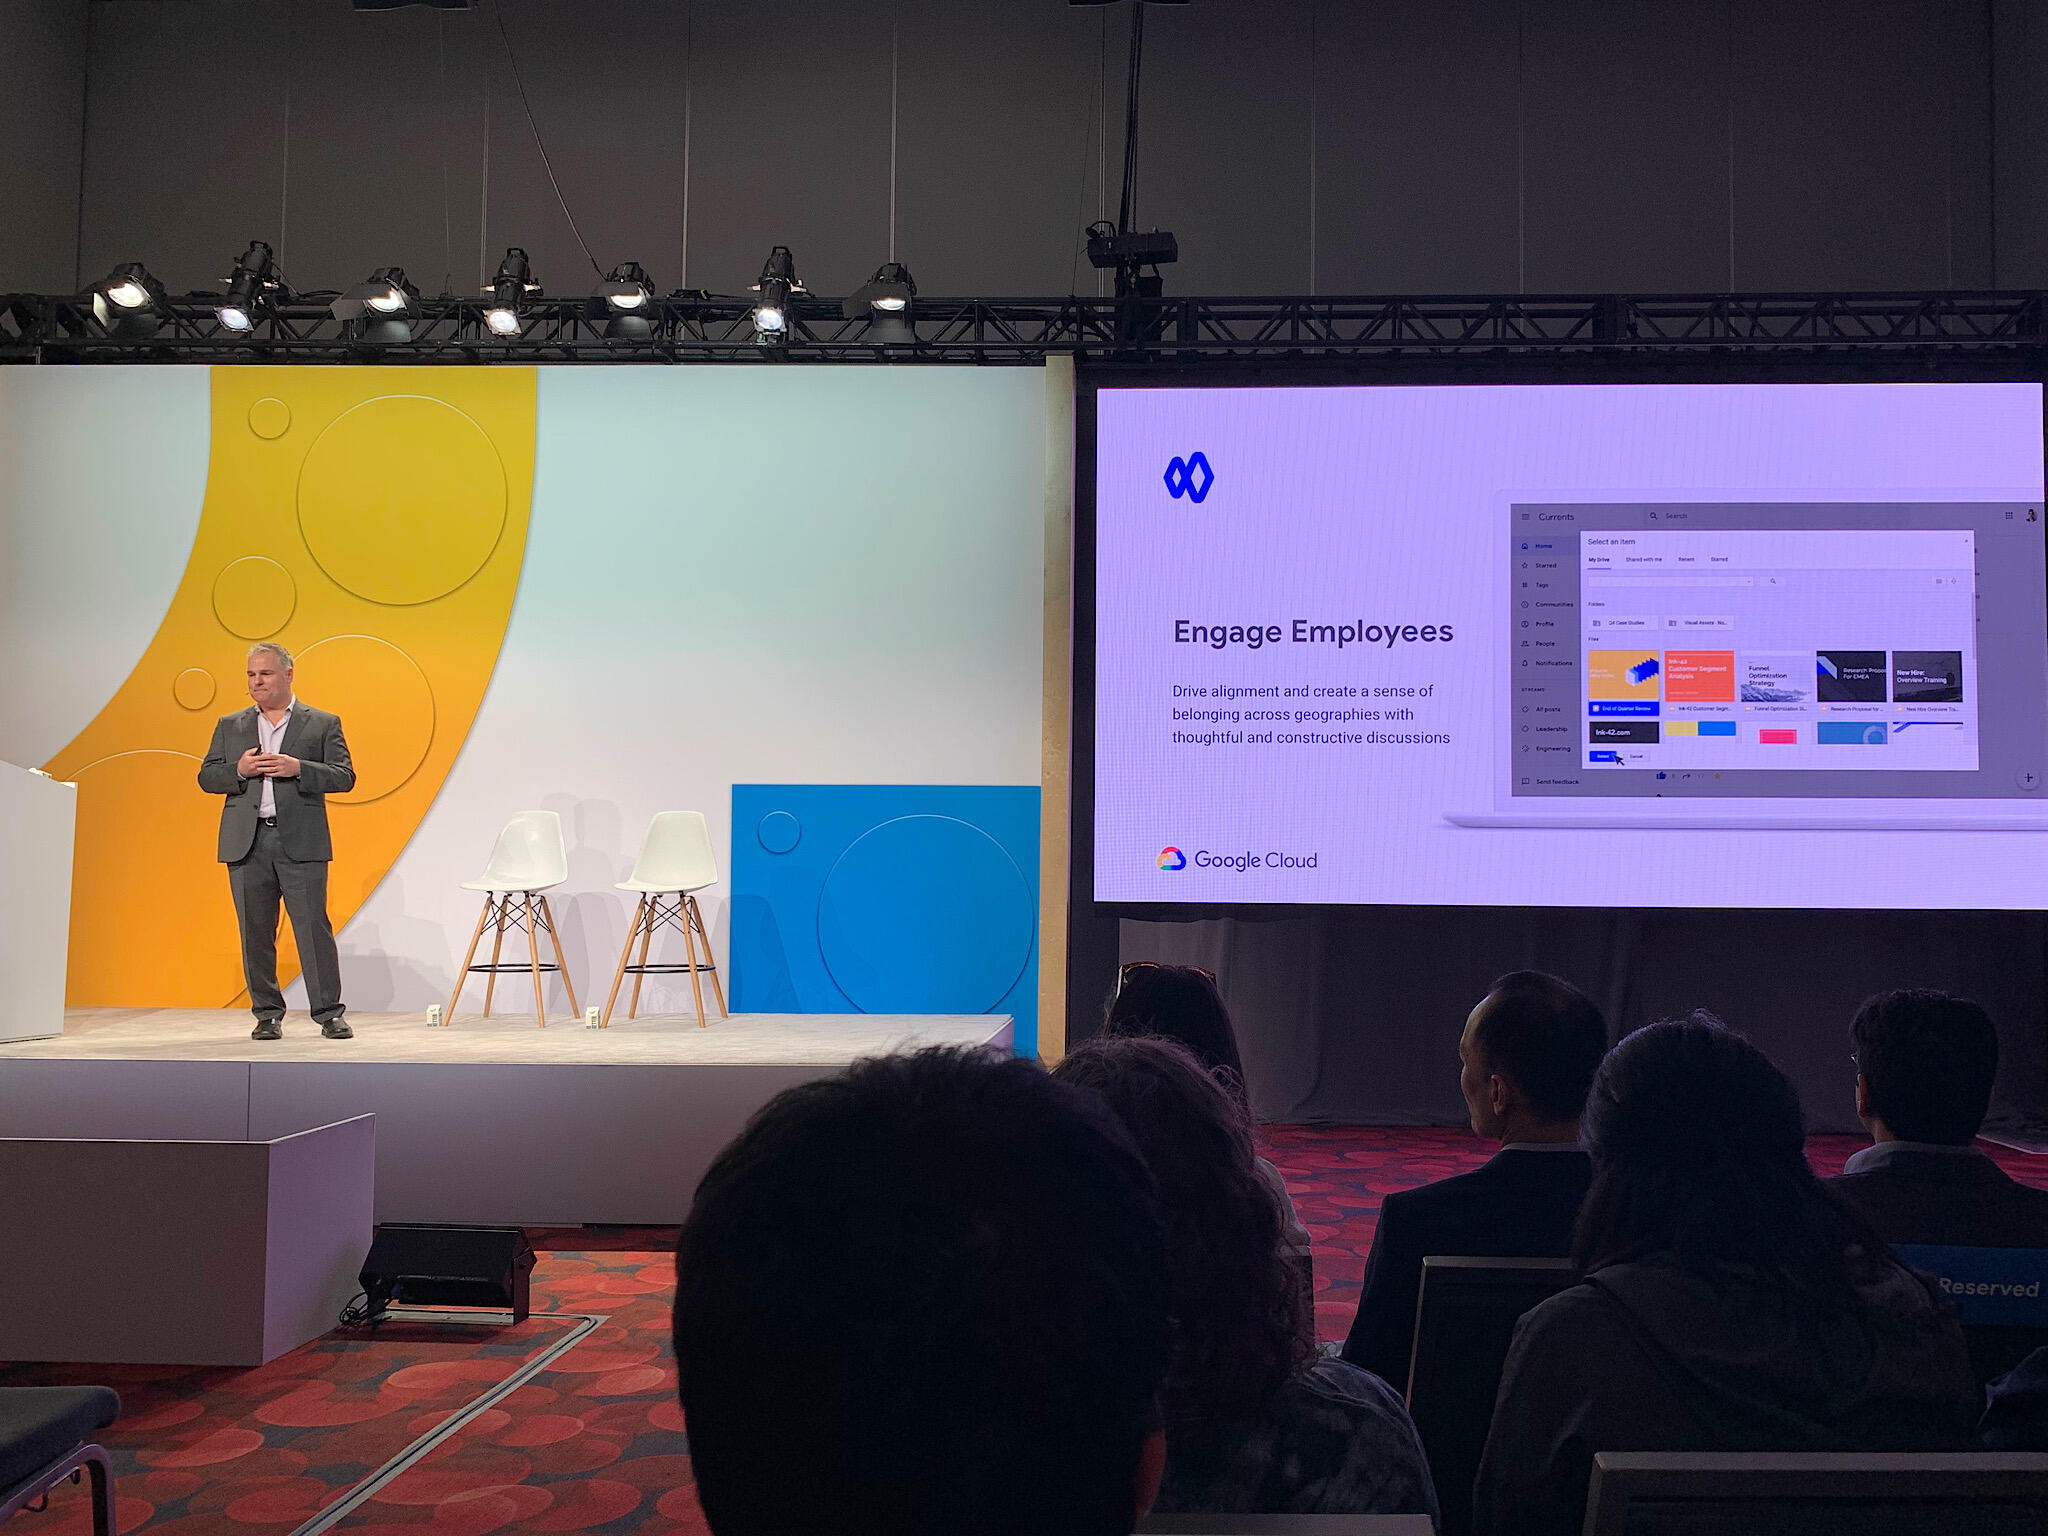 Photo of Google staff (standing on stage, left) with presentation slide of Currents with "Engage Employees" displayed (right)